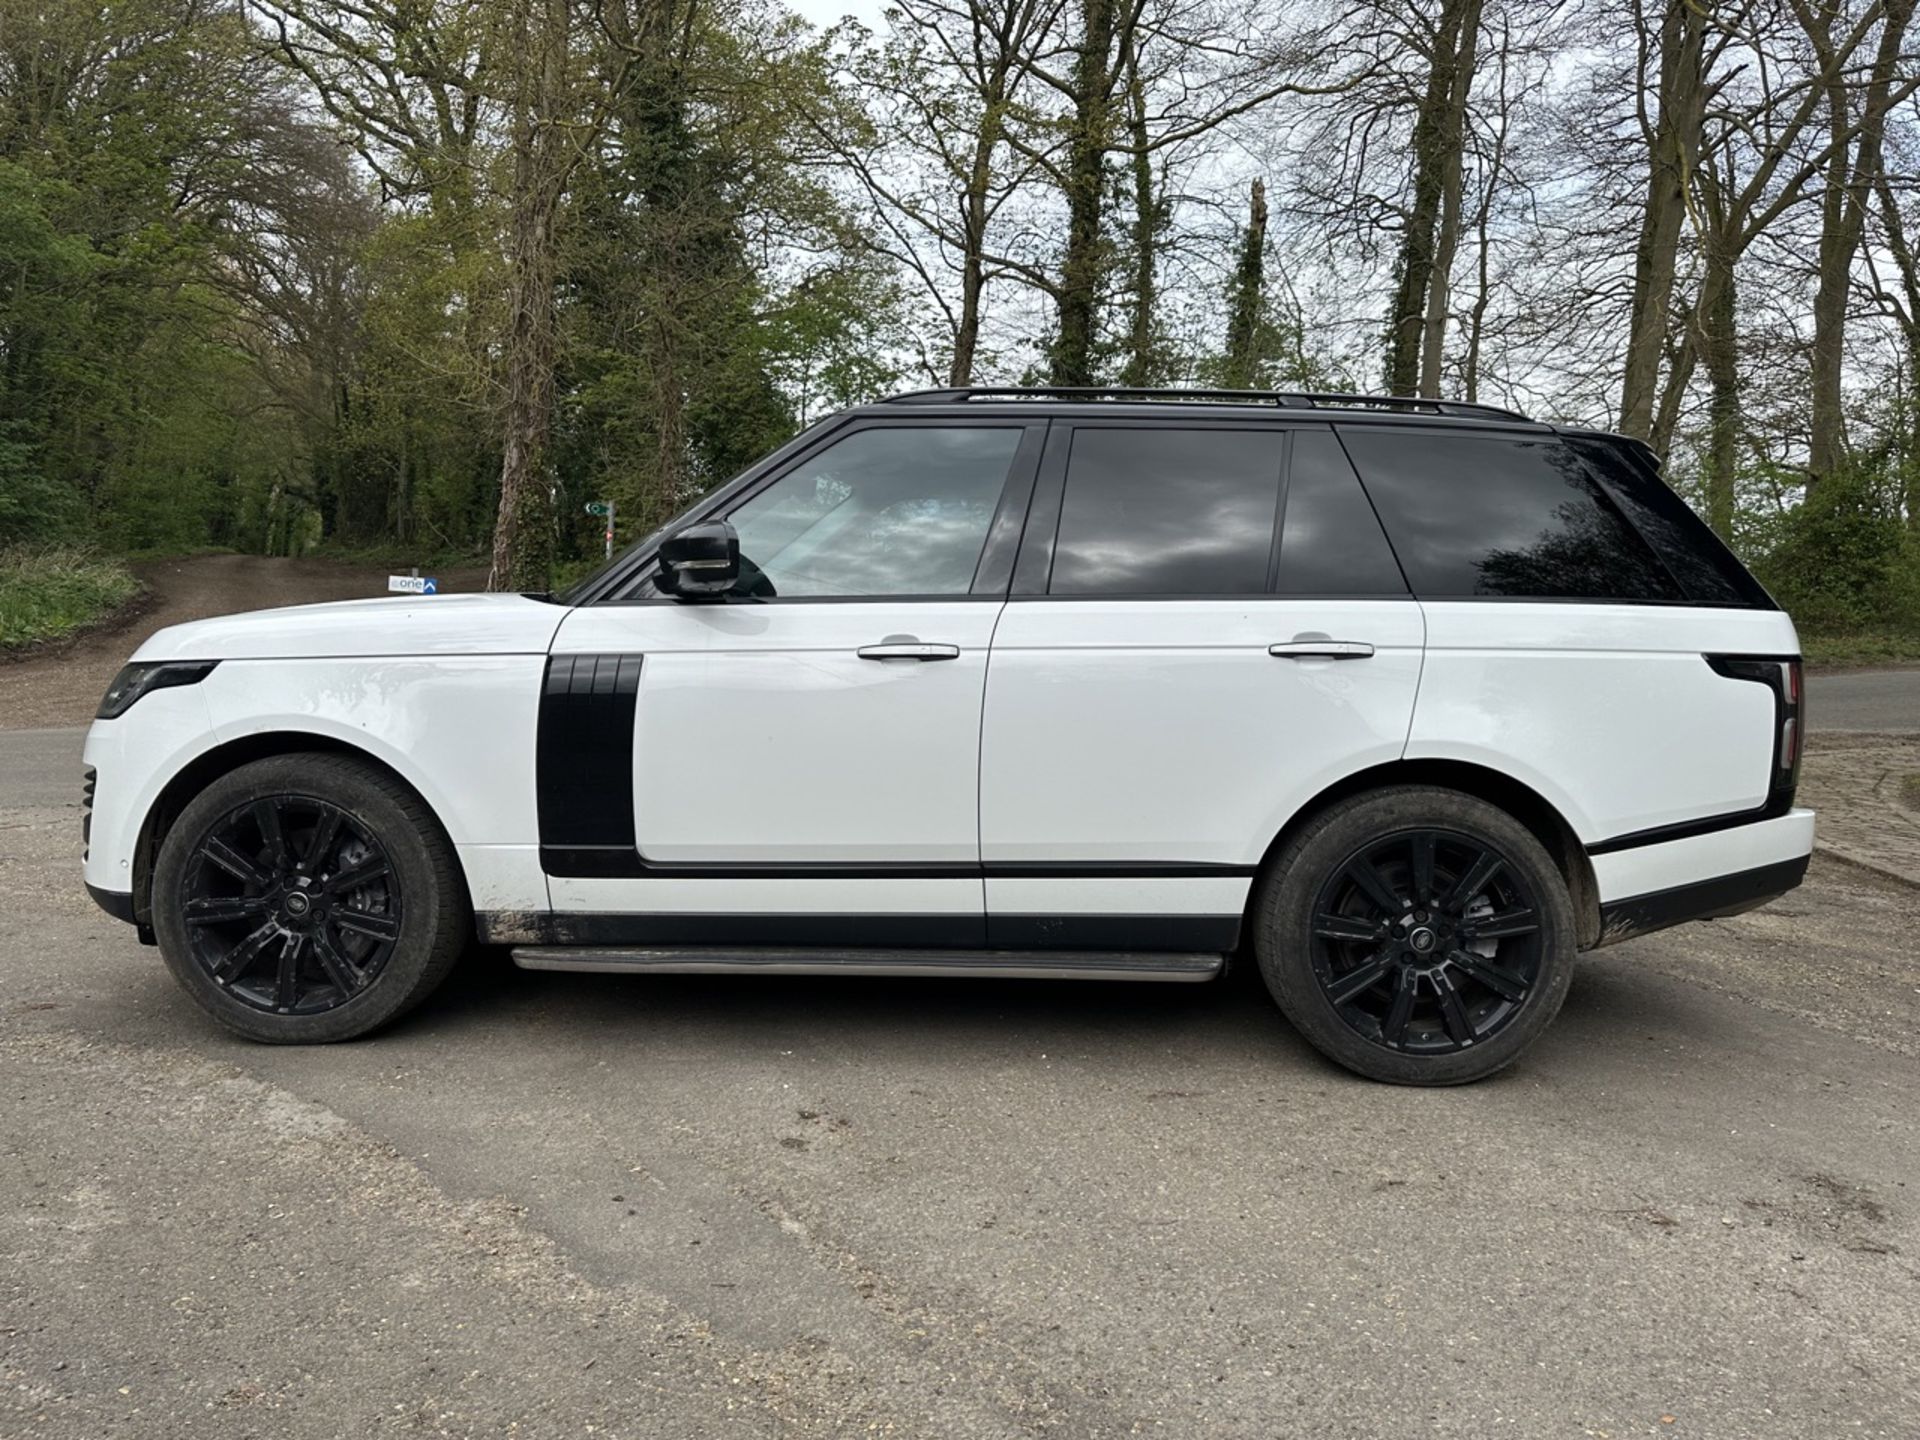 LAND ROVER RANGE ROVER 2.0 P400e Autobiography 4dr Auto - Automatic - 2018 - 31k miles - FULL SH - Image 6 of 17